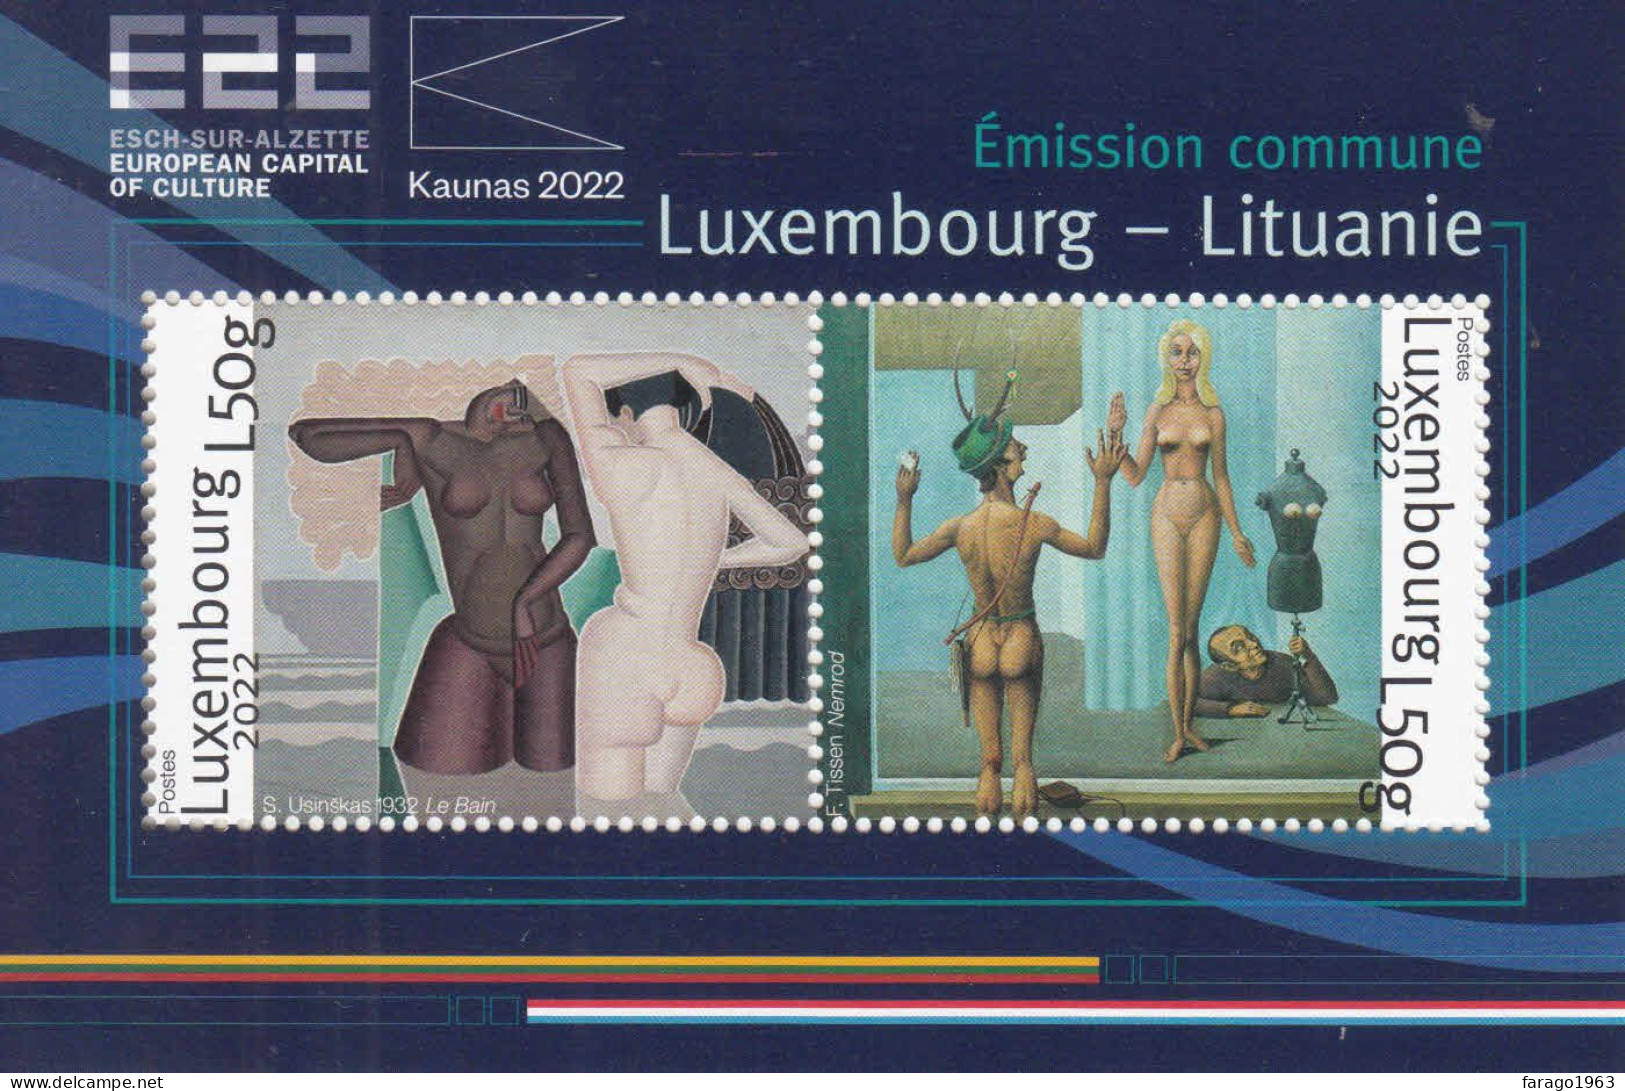 2022 Luxembourg Art Kaunas European Capital Of Culture JOINT ISSUE Souvenir Sheet  MNH @ BELOW FACE VALUE - Unused Stamps